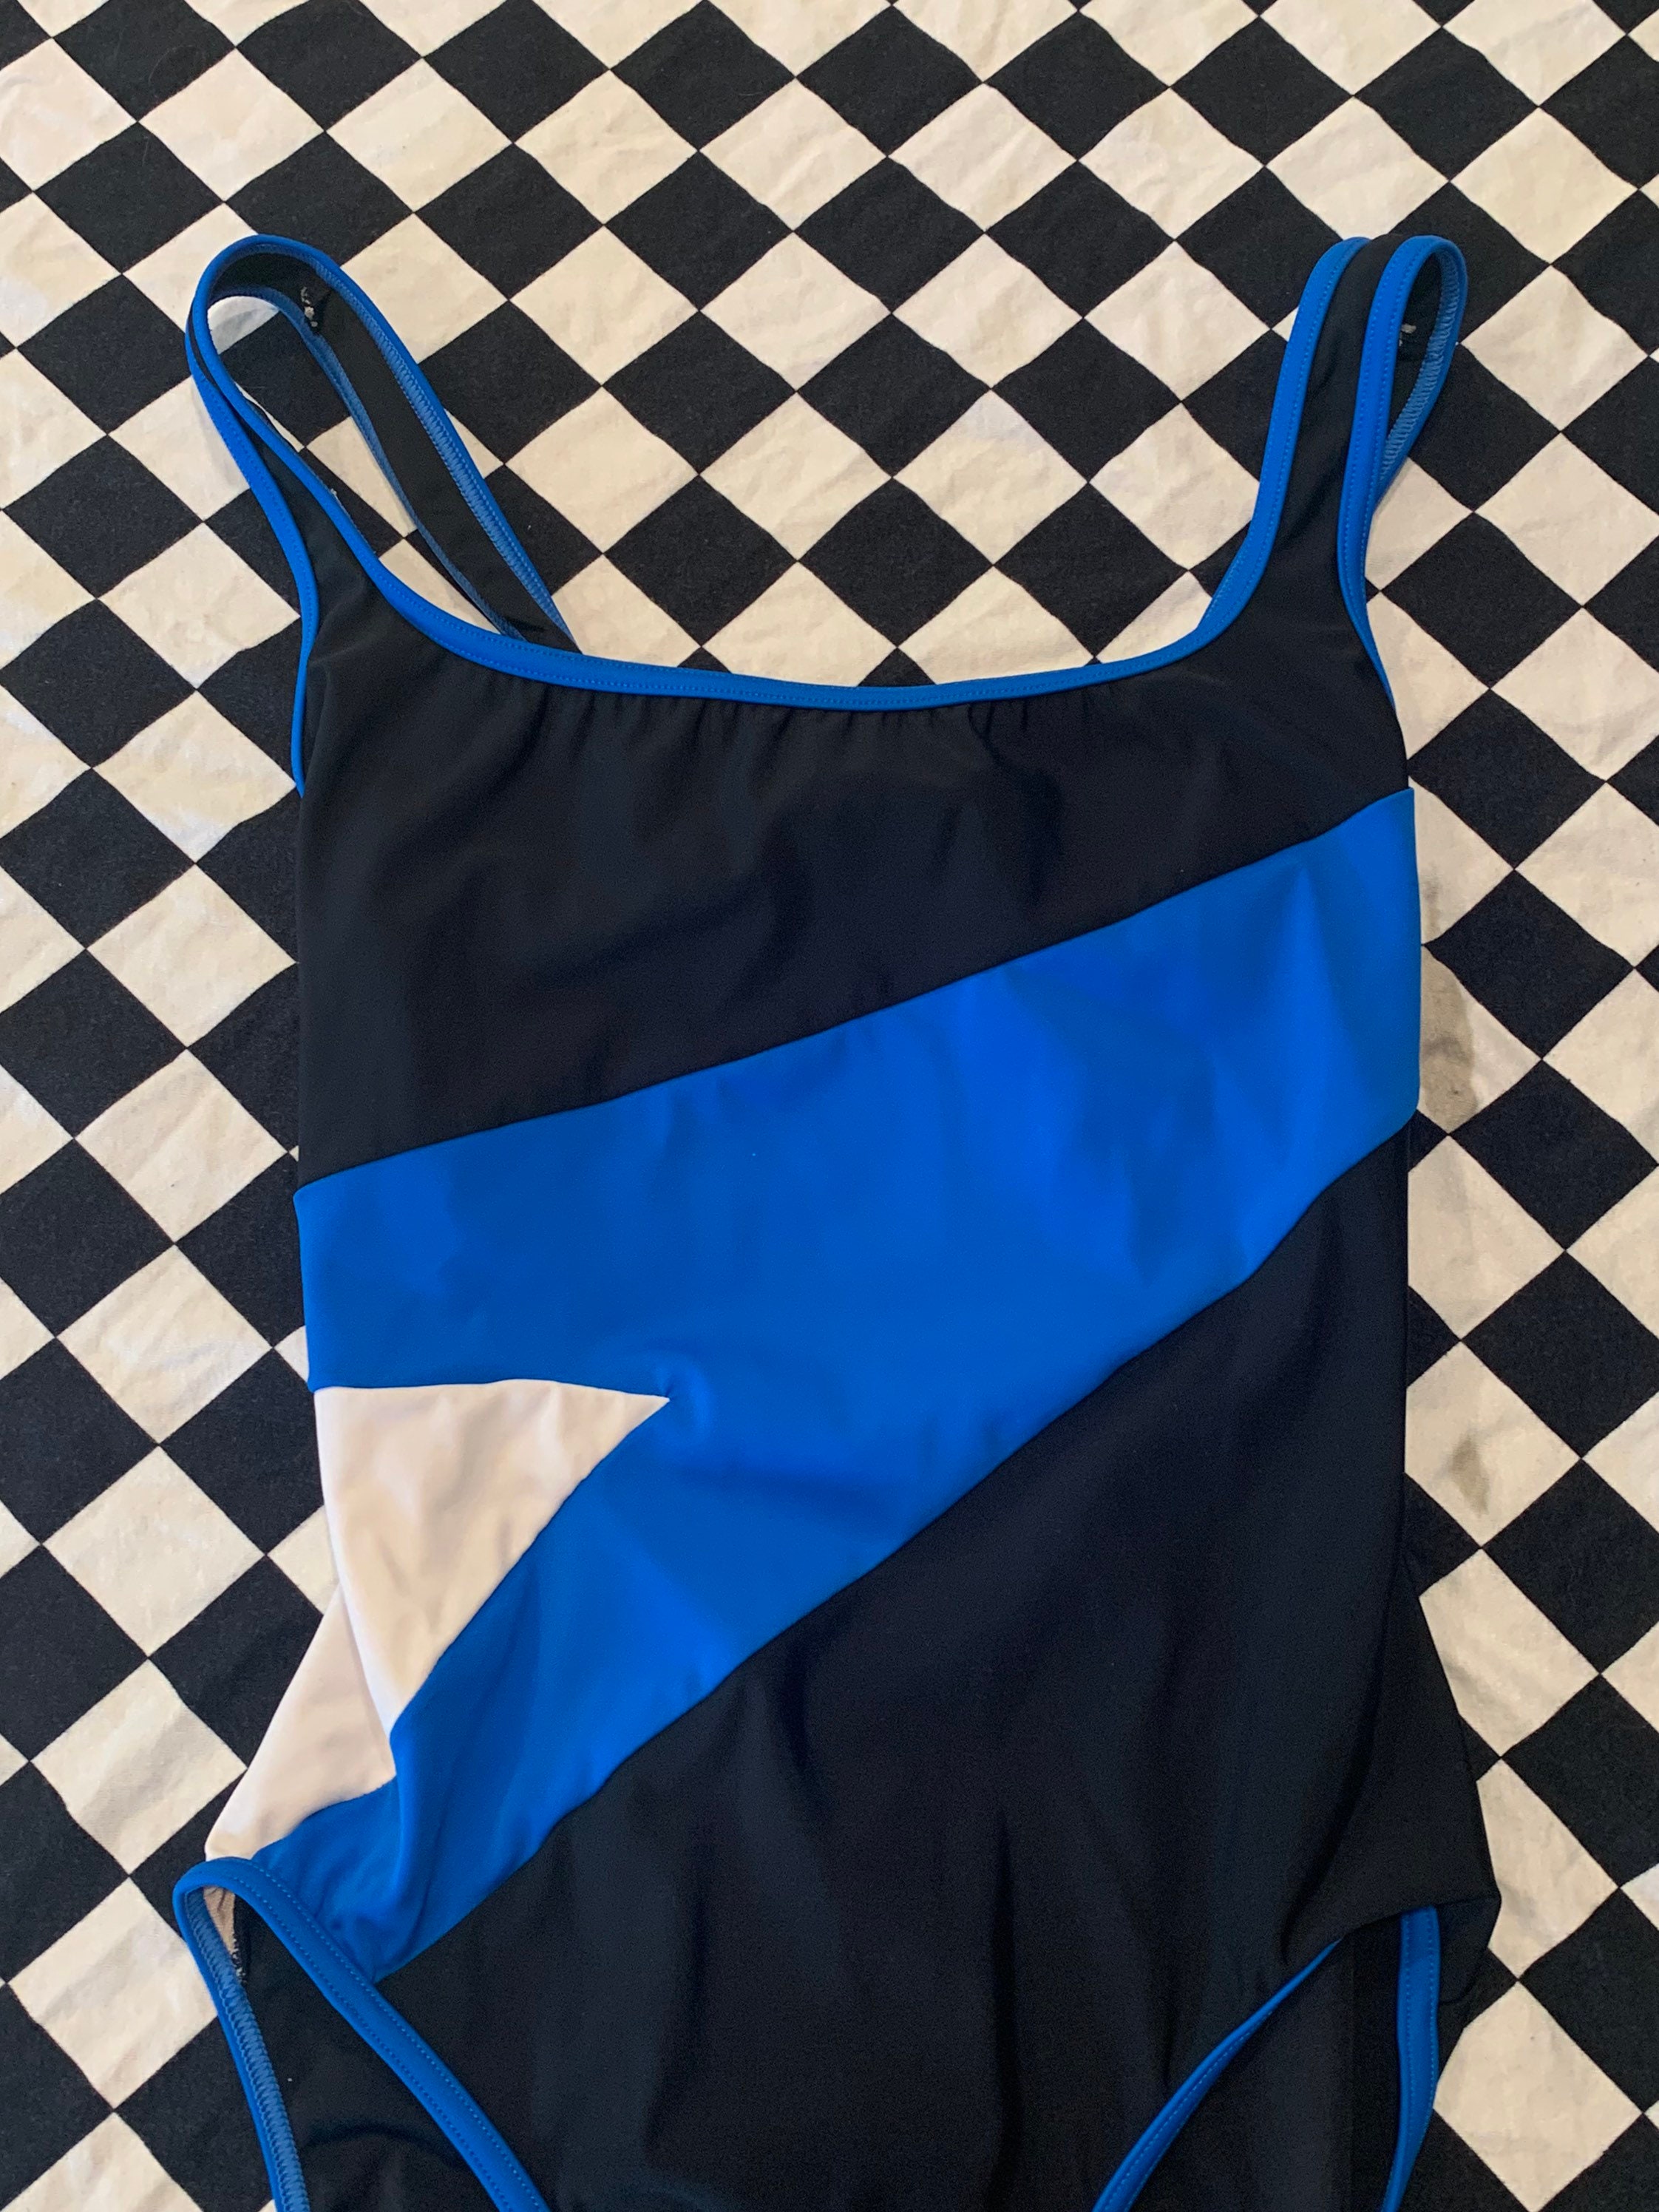 80s 90s Vintage Black Blue One Piece Bathing Suit Abstract | Etsy